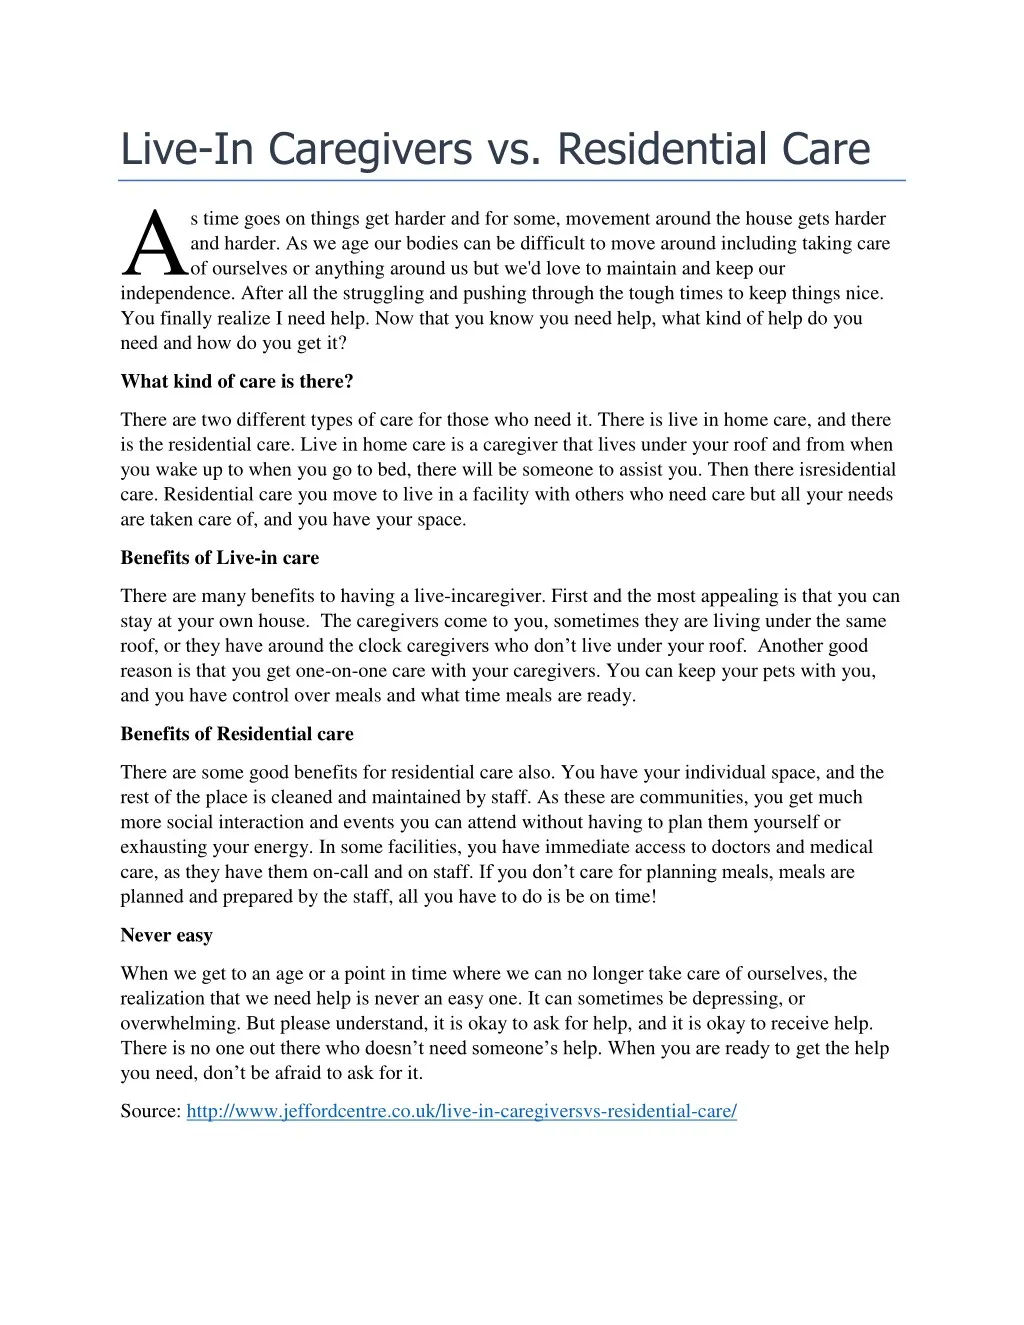 live in caregivers vs residential care a